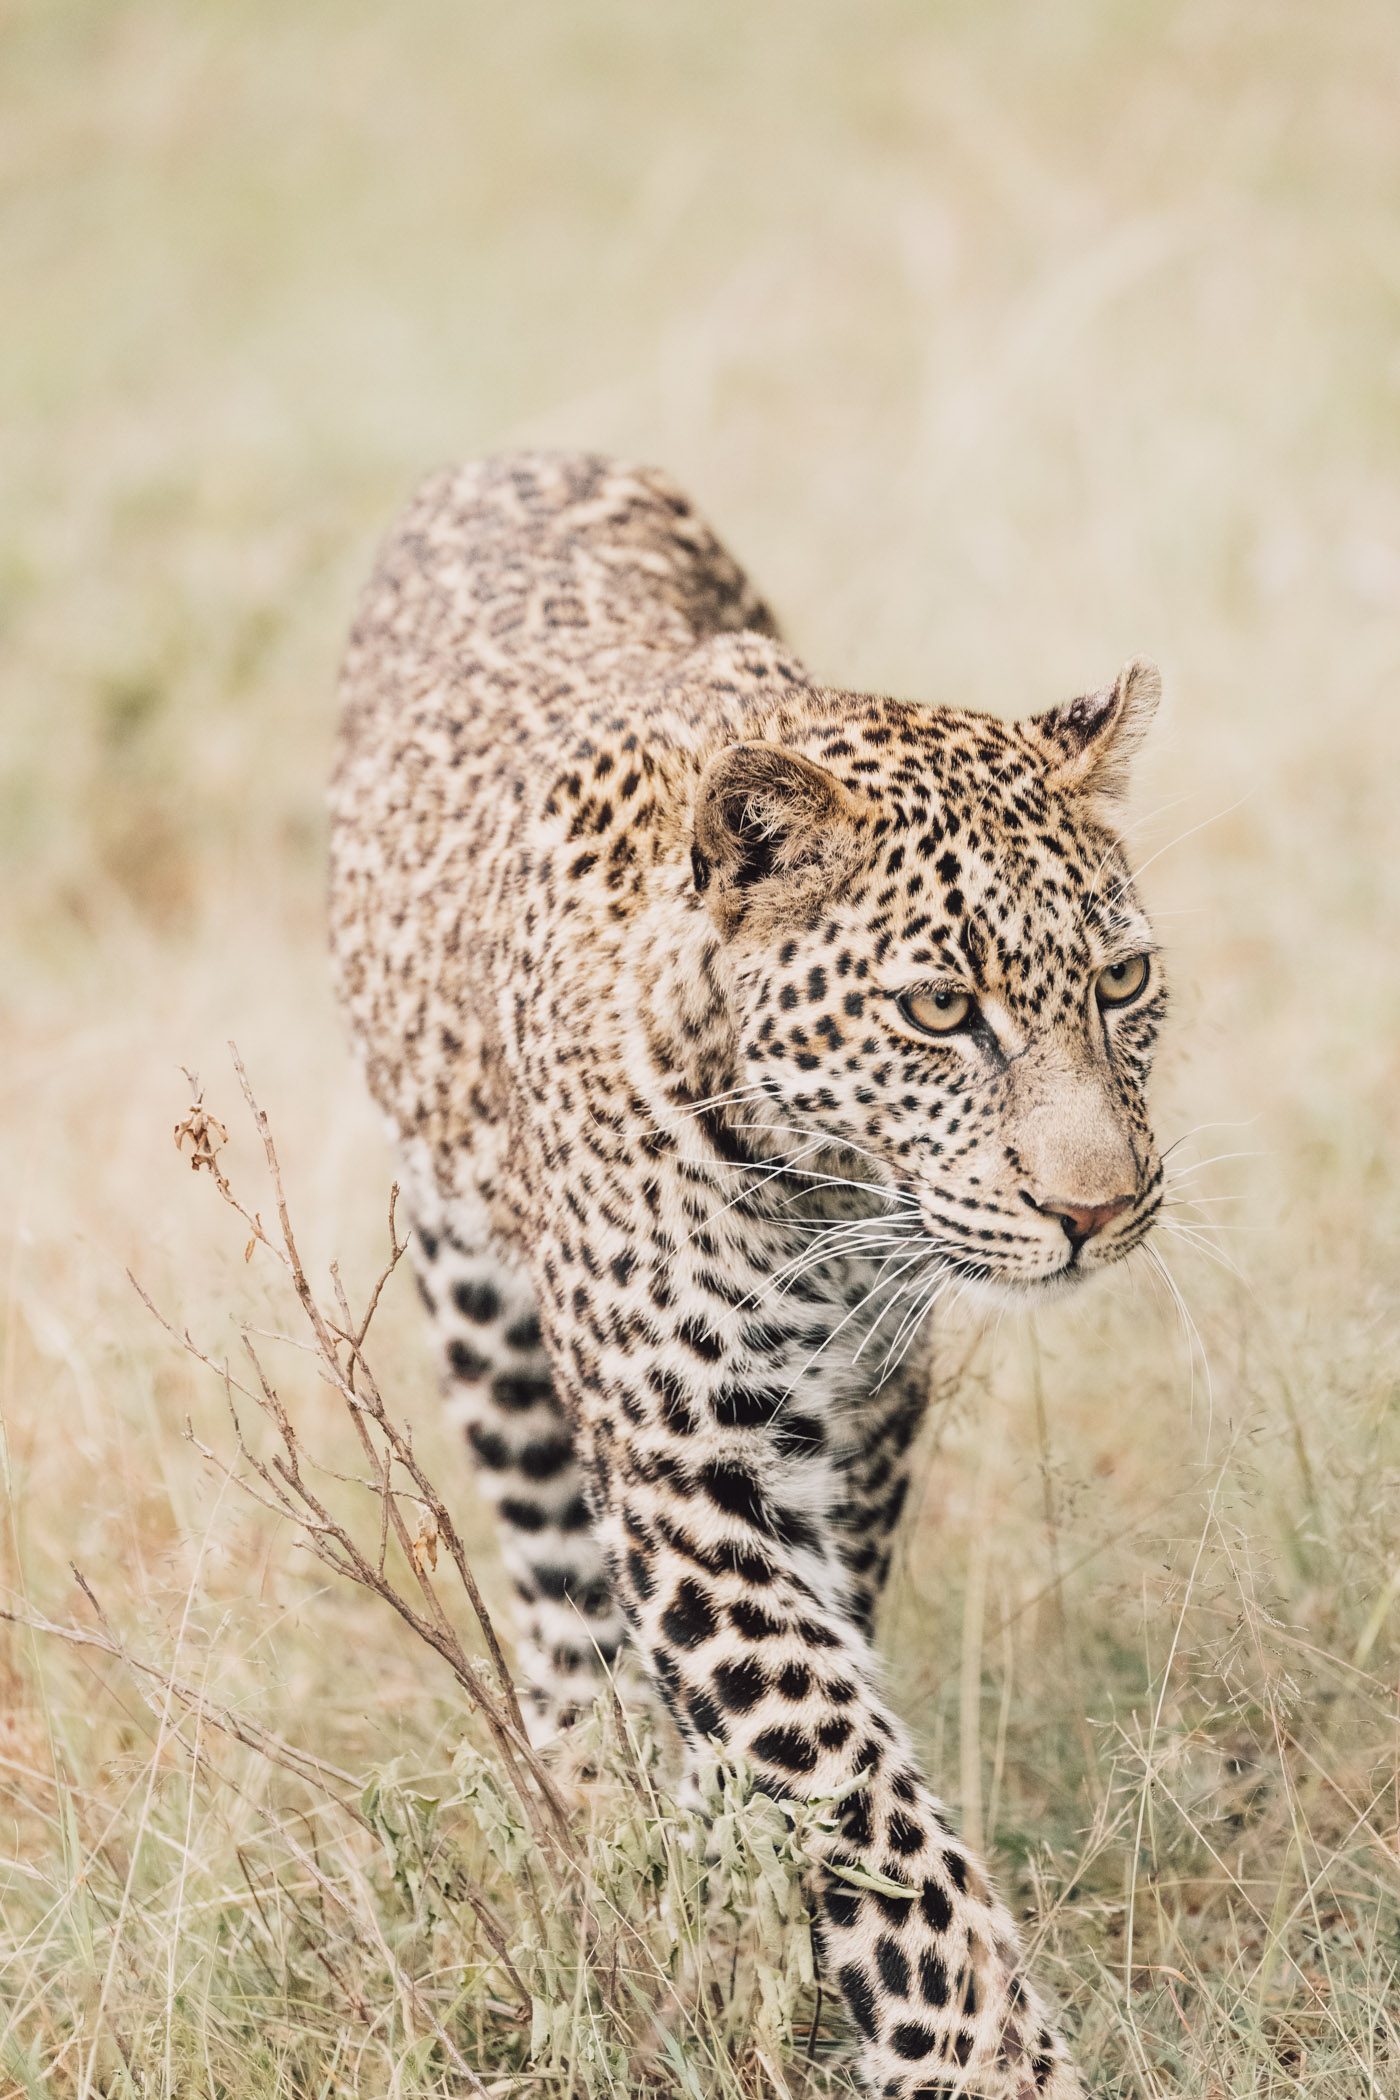 A young leopard called Roho in the Maasai Mara